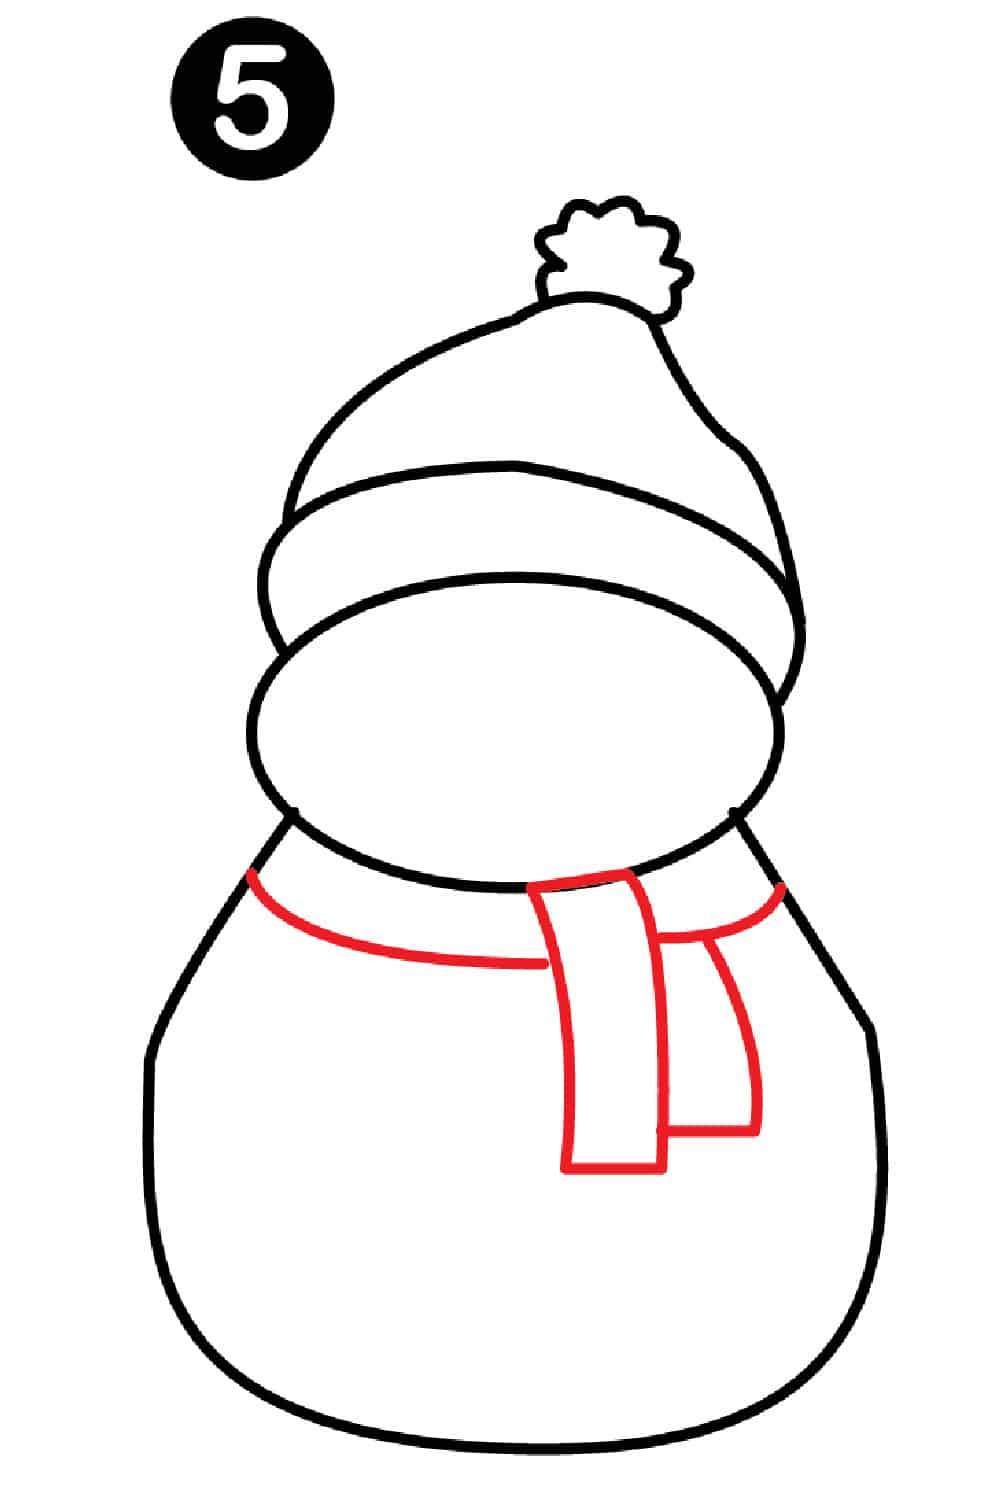 How to Draw a Snowman 5th Step